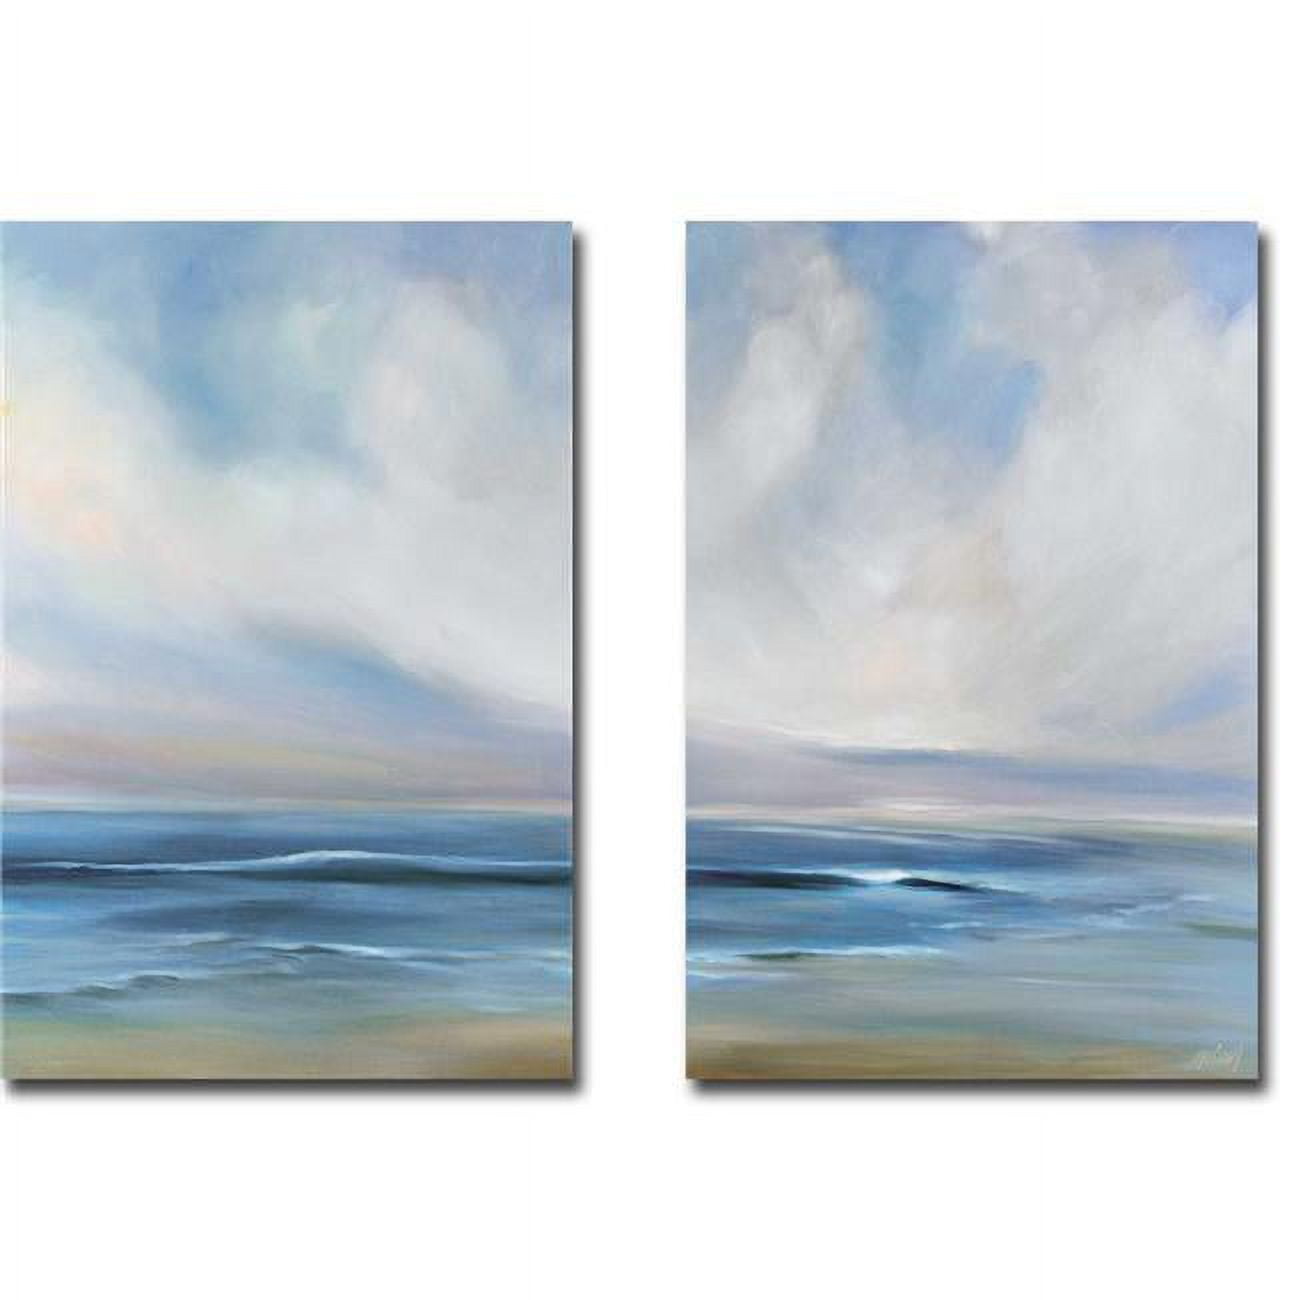 1218i782cg Cove Walk I & Ii By Joanne Parent 2-piece Premium Gallery-wrapped Canvas Giclee Art Set - 12 X 18 X 1.5 In.